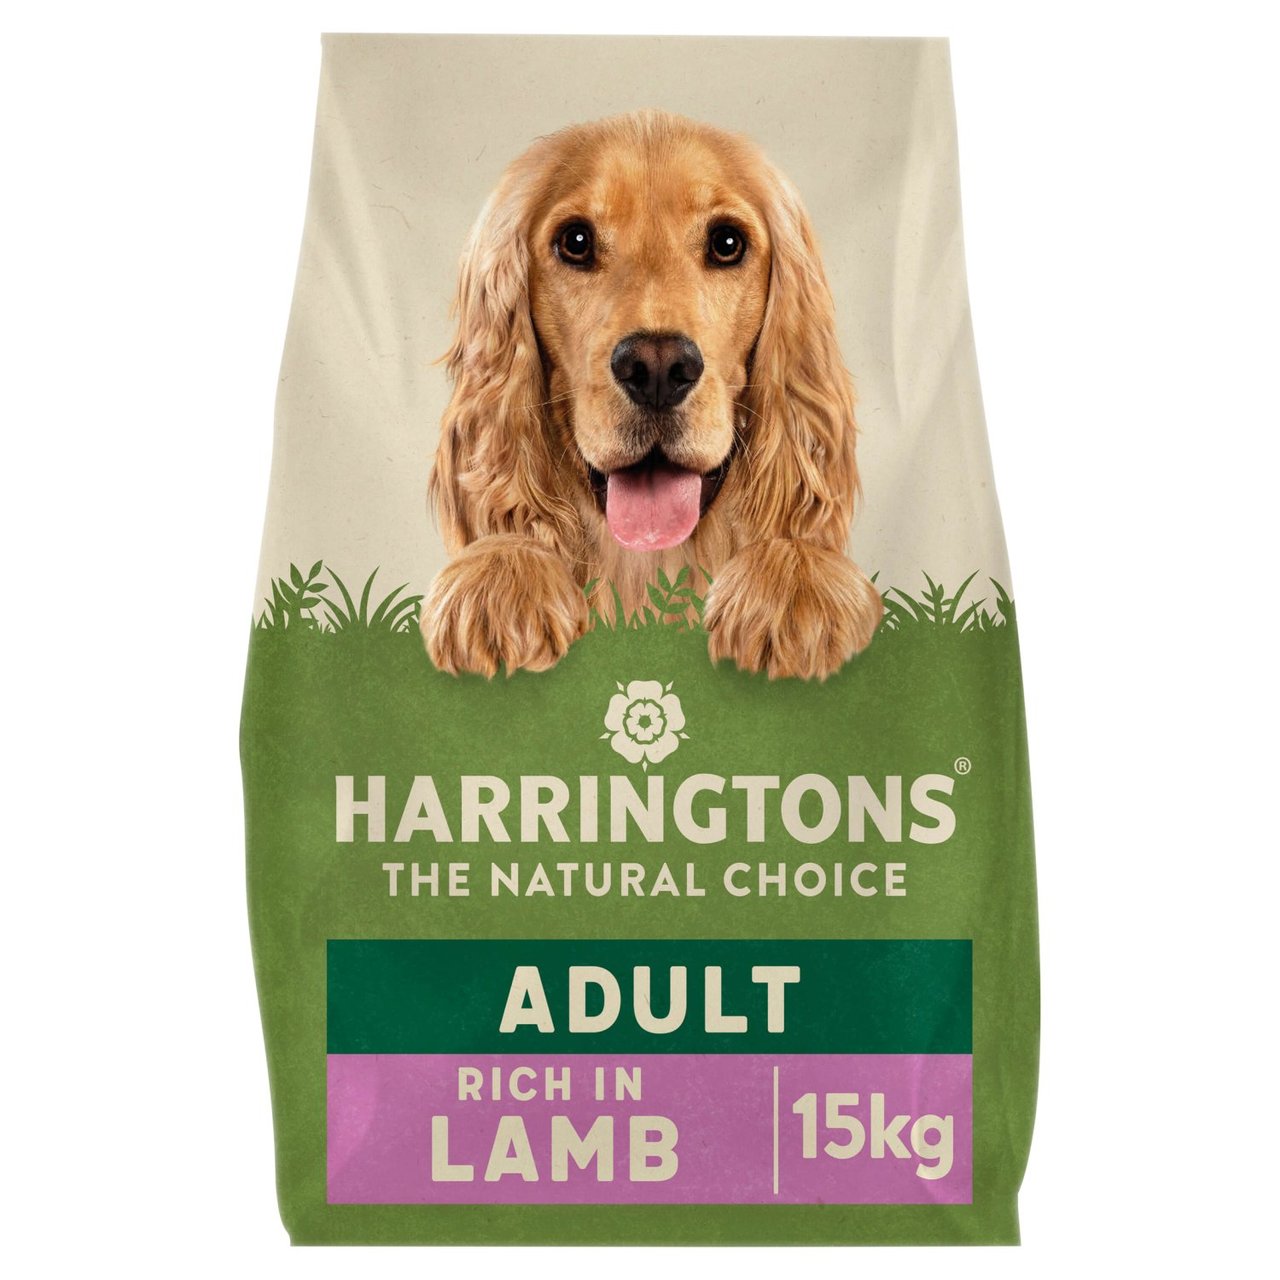 An image of Harringtons Dog Complete Lamb & Rice